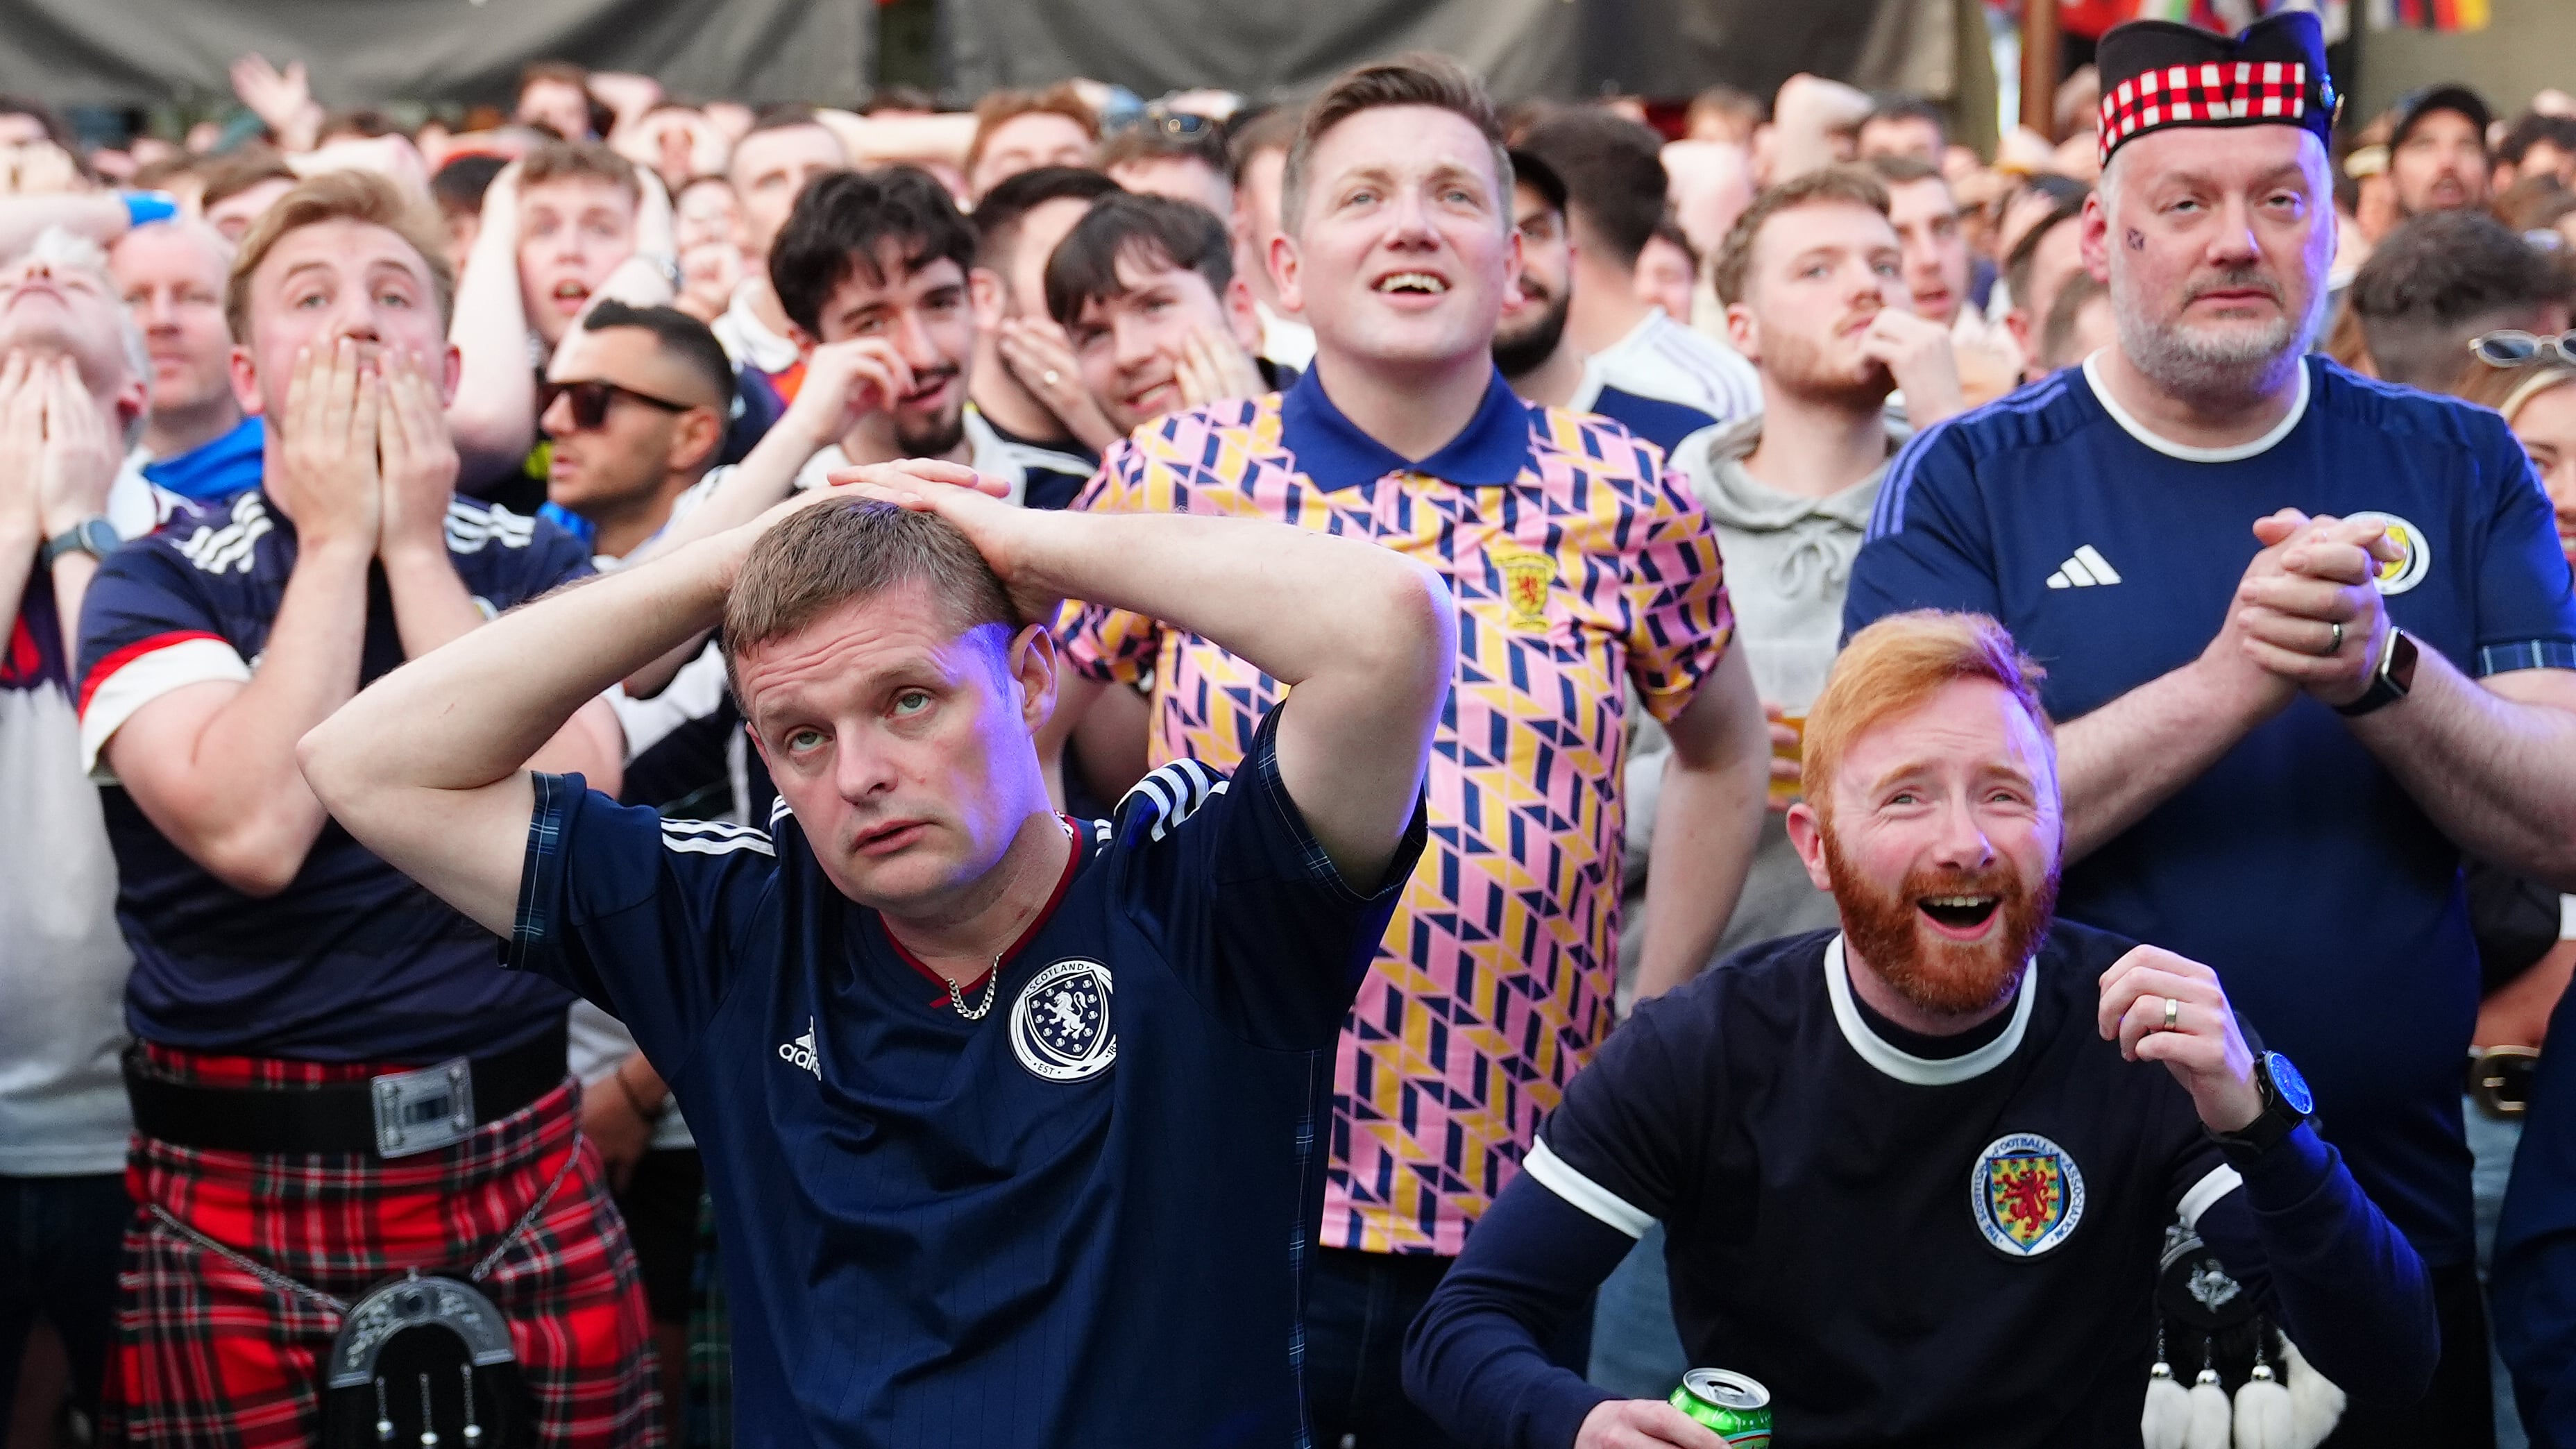 Will there be joy or misery for Scotland fans after they play Hungary?